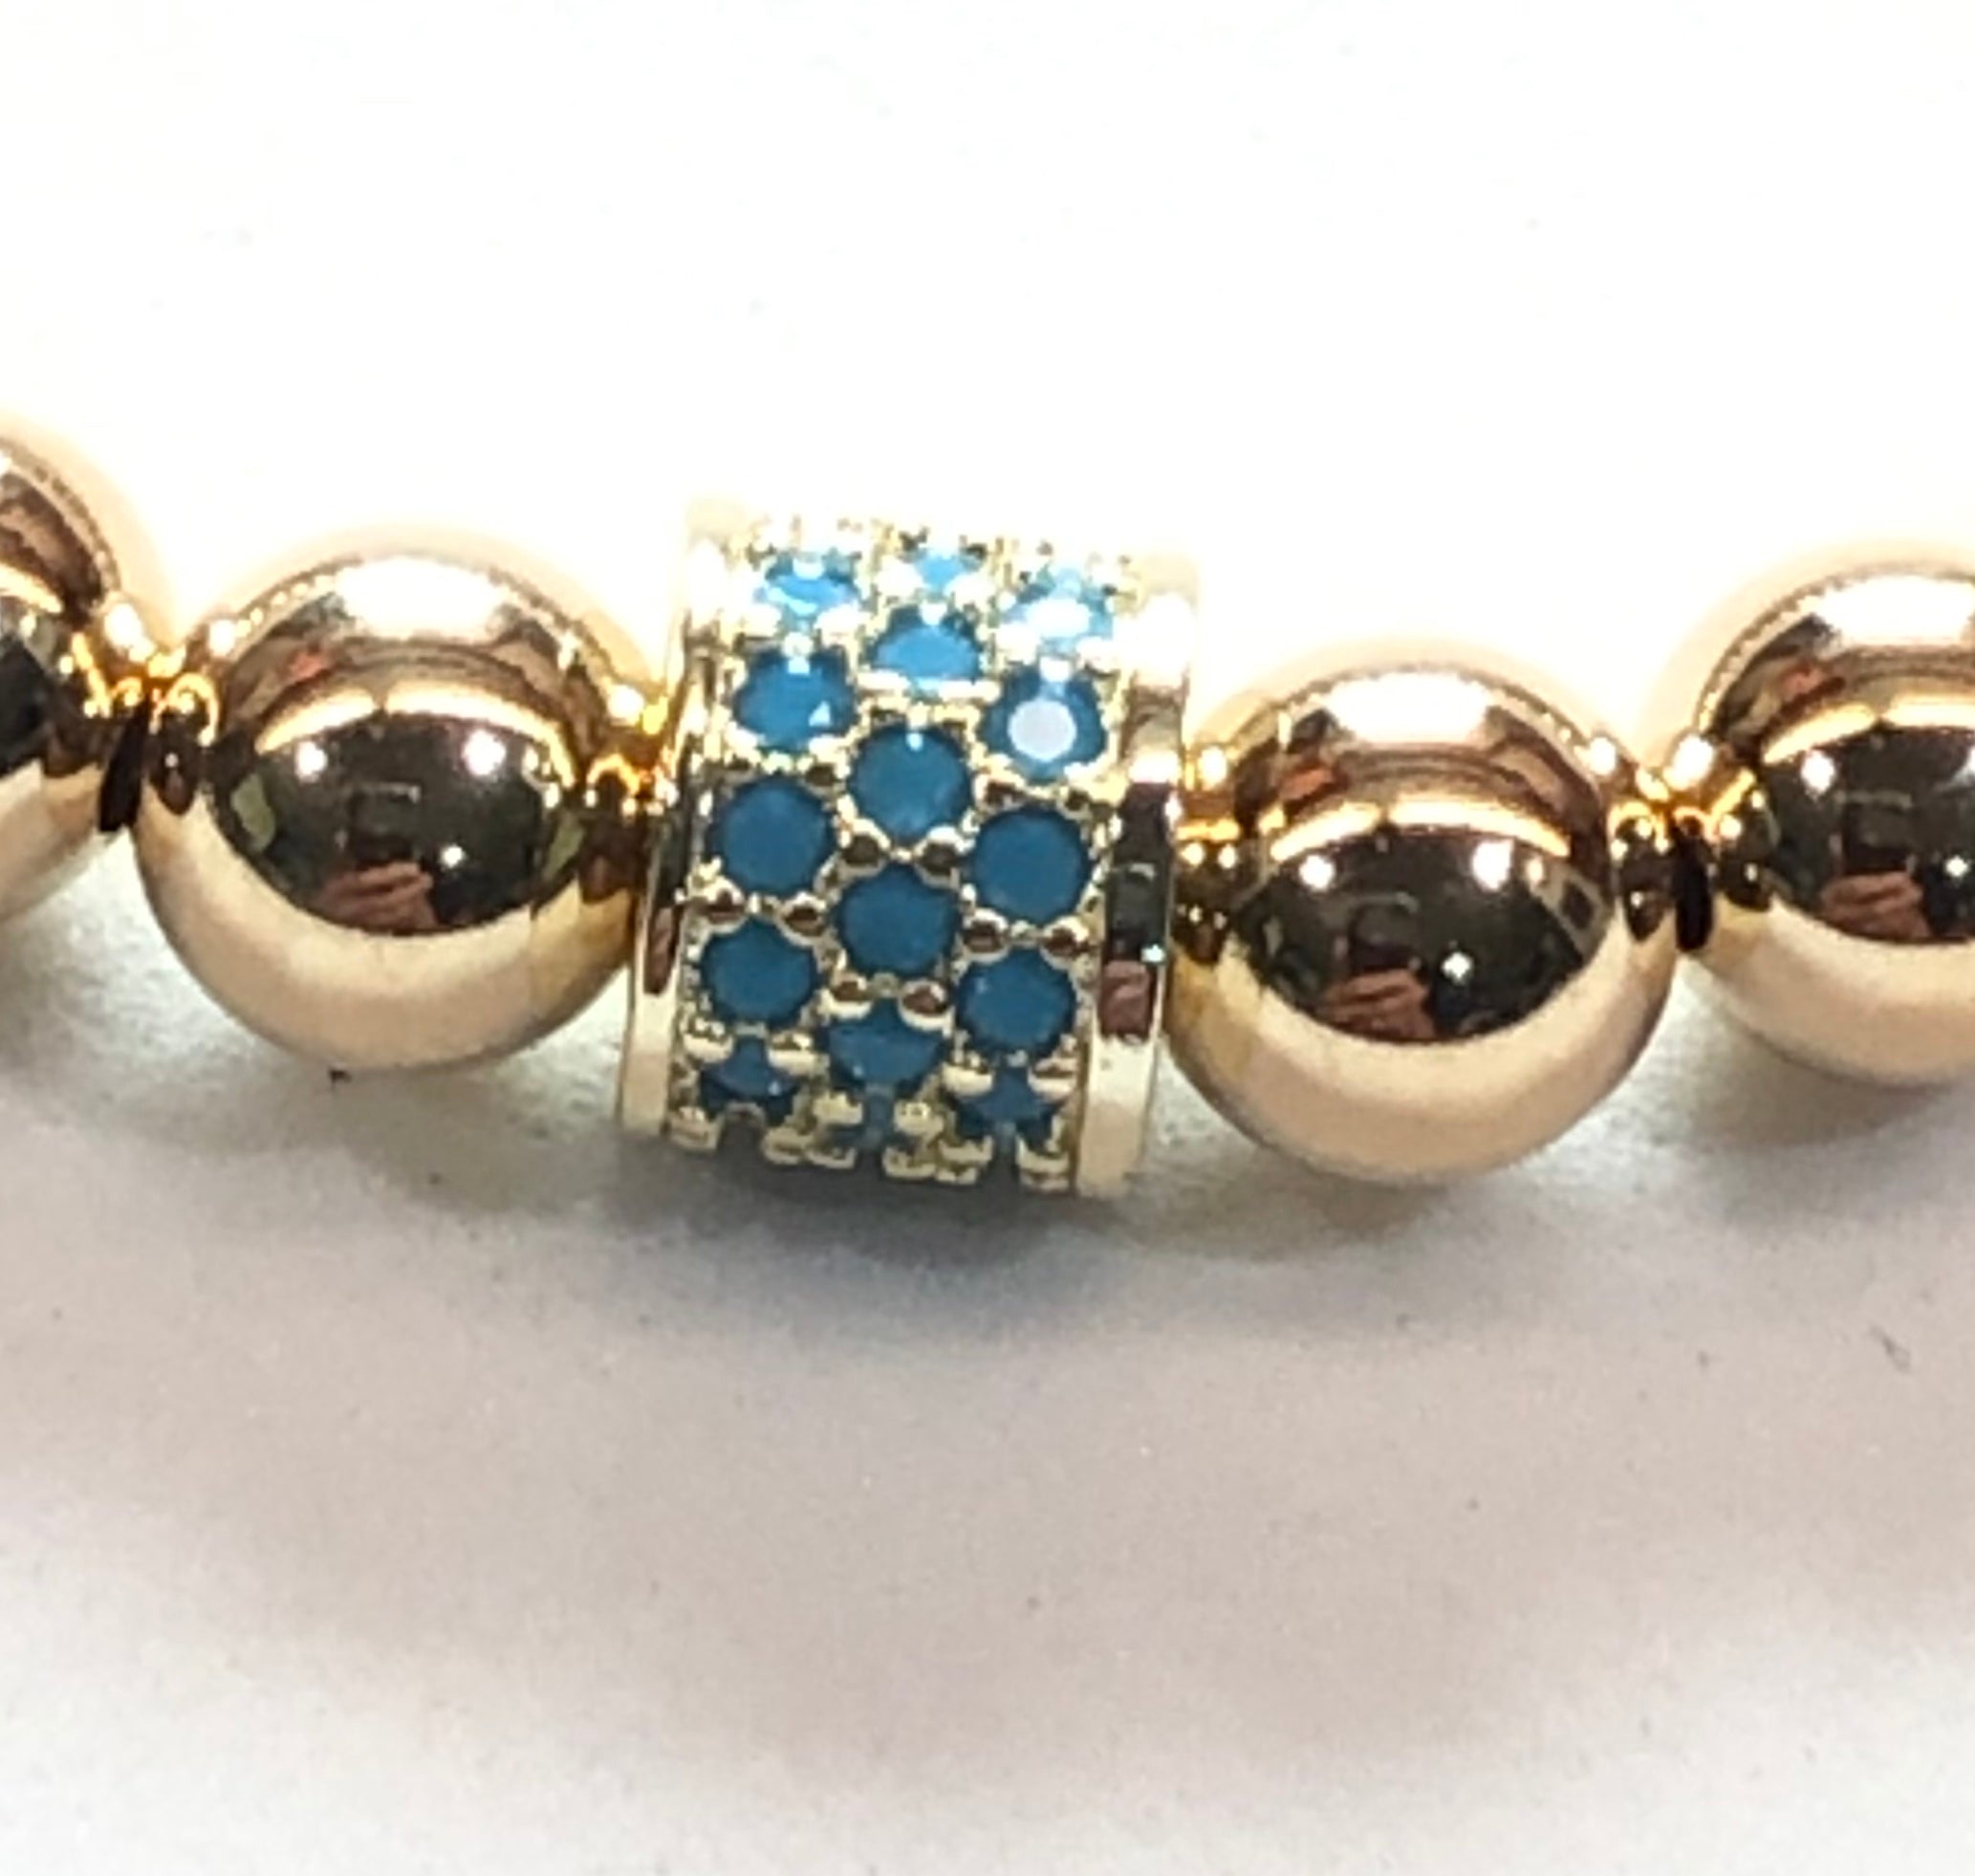 6mm 14kt Gold Filled Bead Bracelet with Turquoise Jeweled Wheel